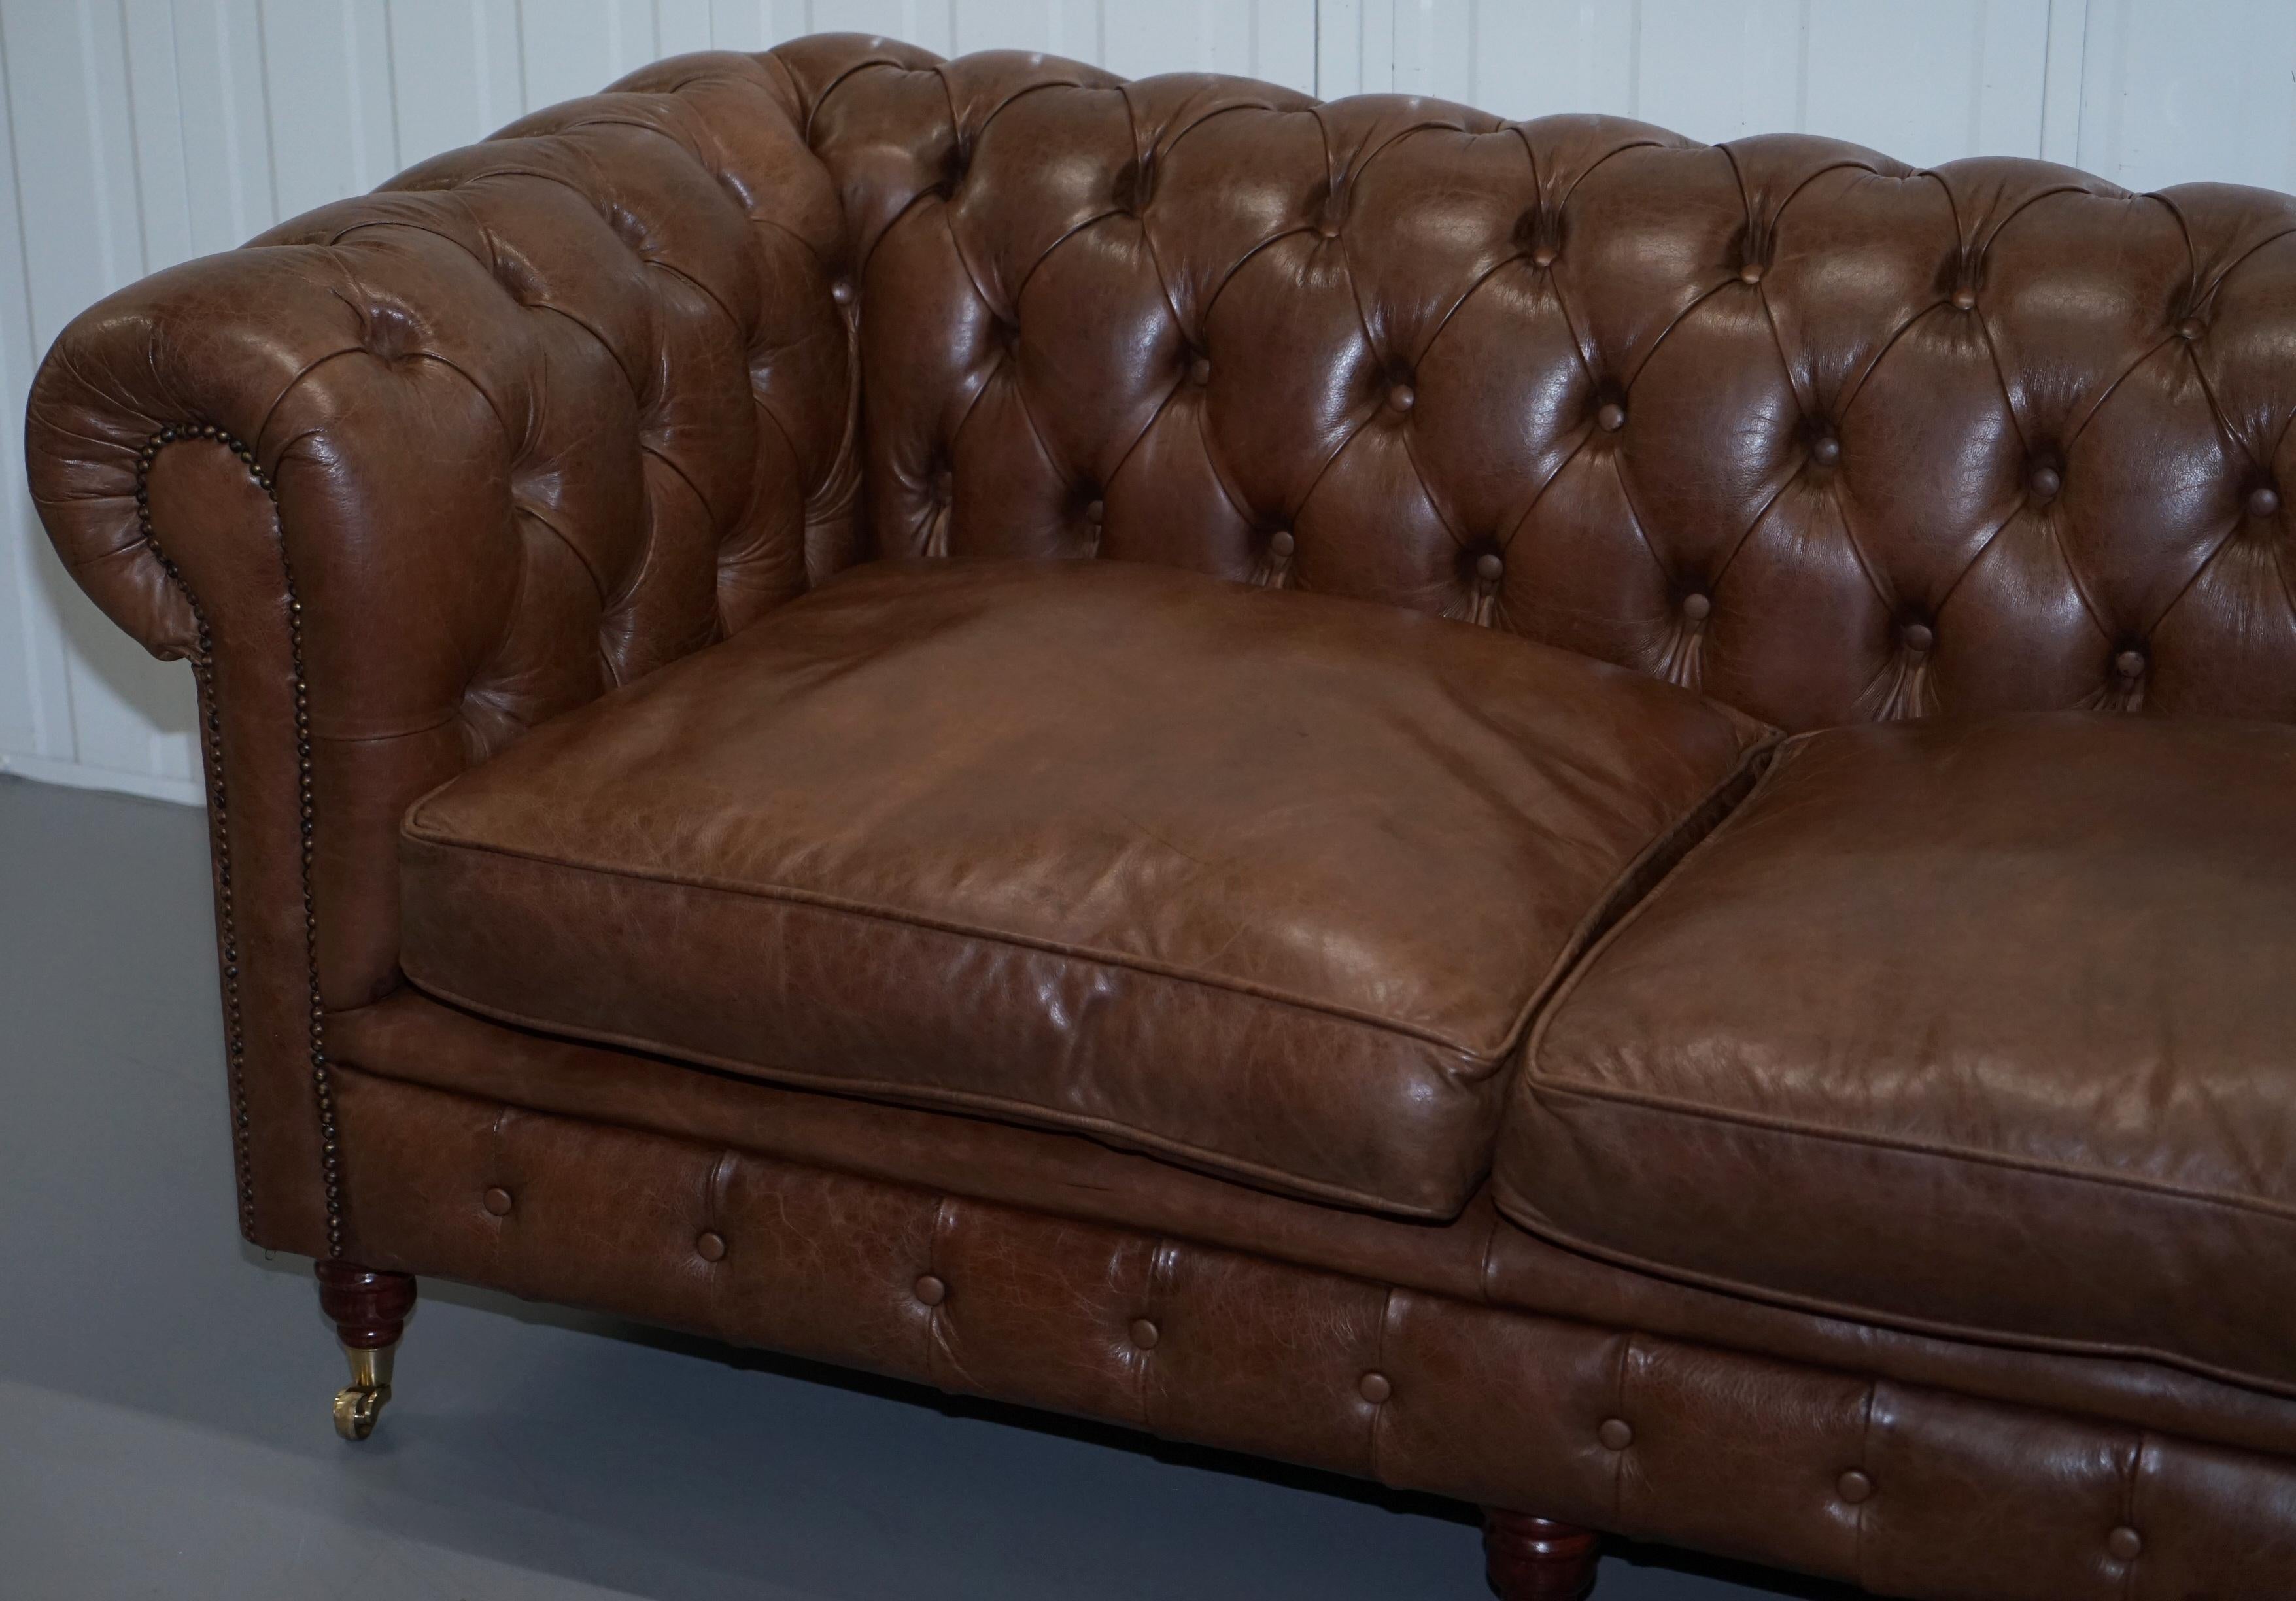 English Chesterfield Heritage Brown Leather Sofas & Armchair Suite 2-3 3-4 Seat Sofas